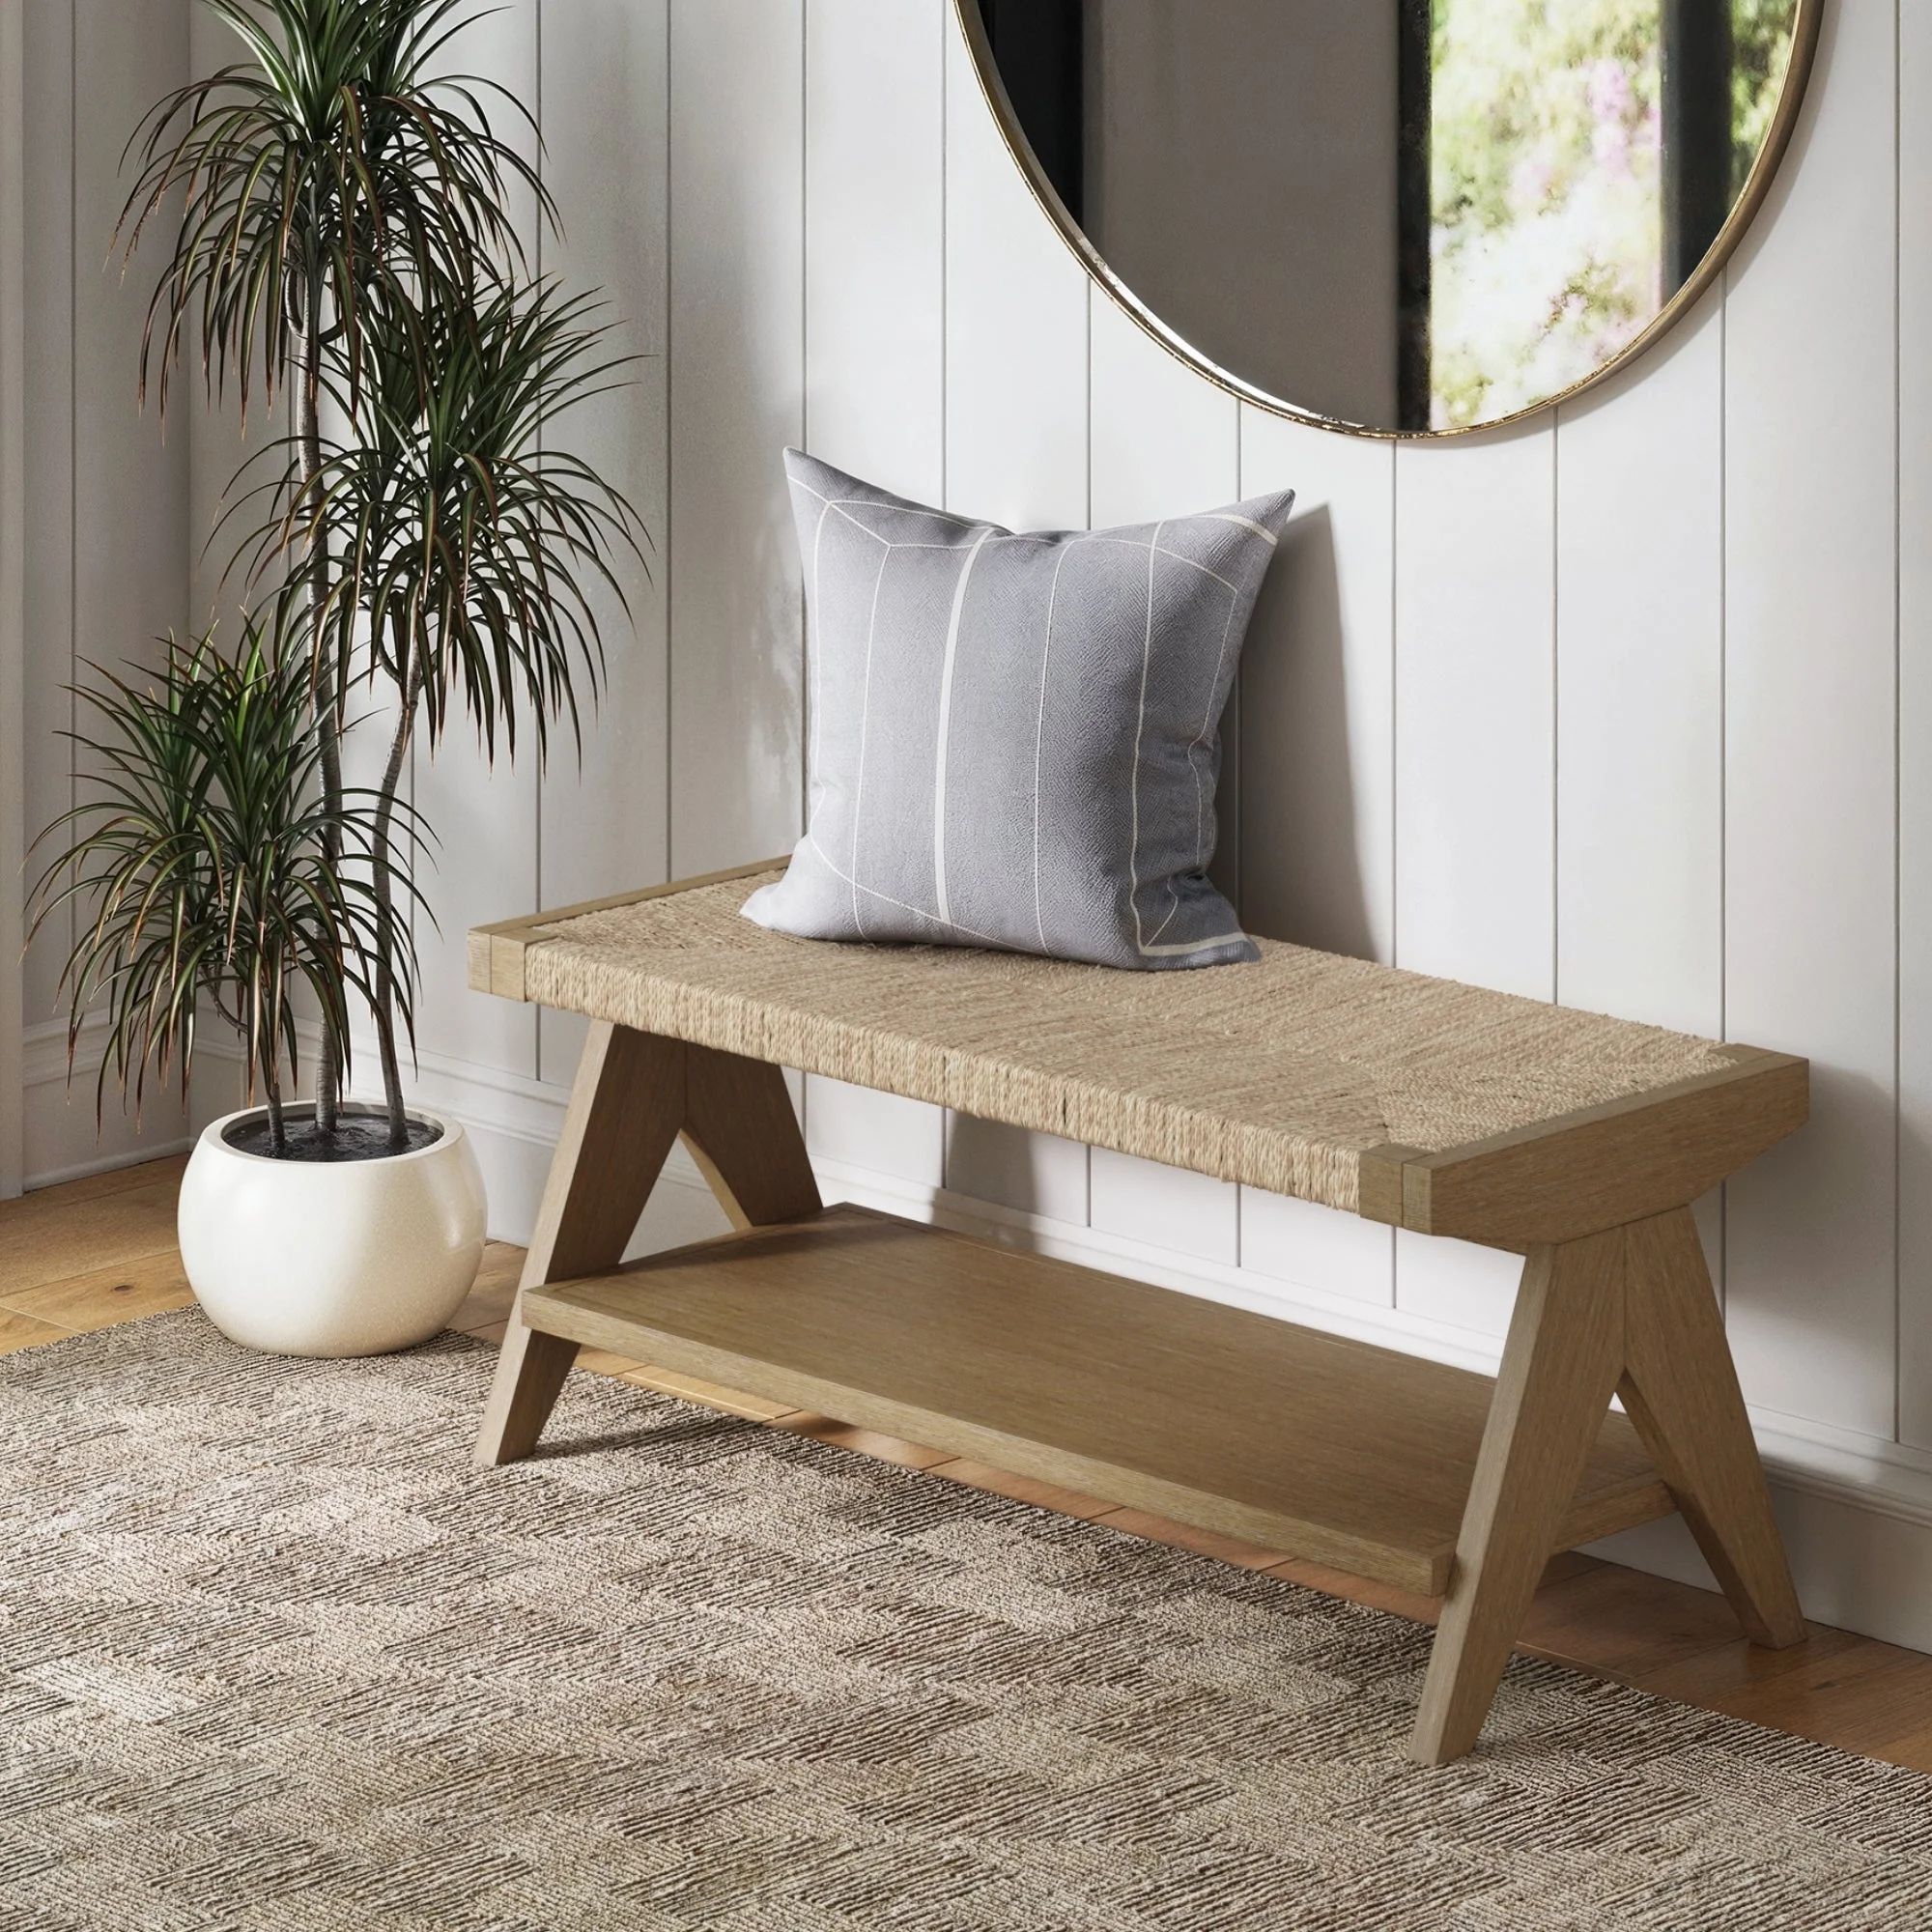 Wood & Seagrass Entryway Bench with Shelf | Nathan James